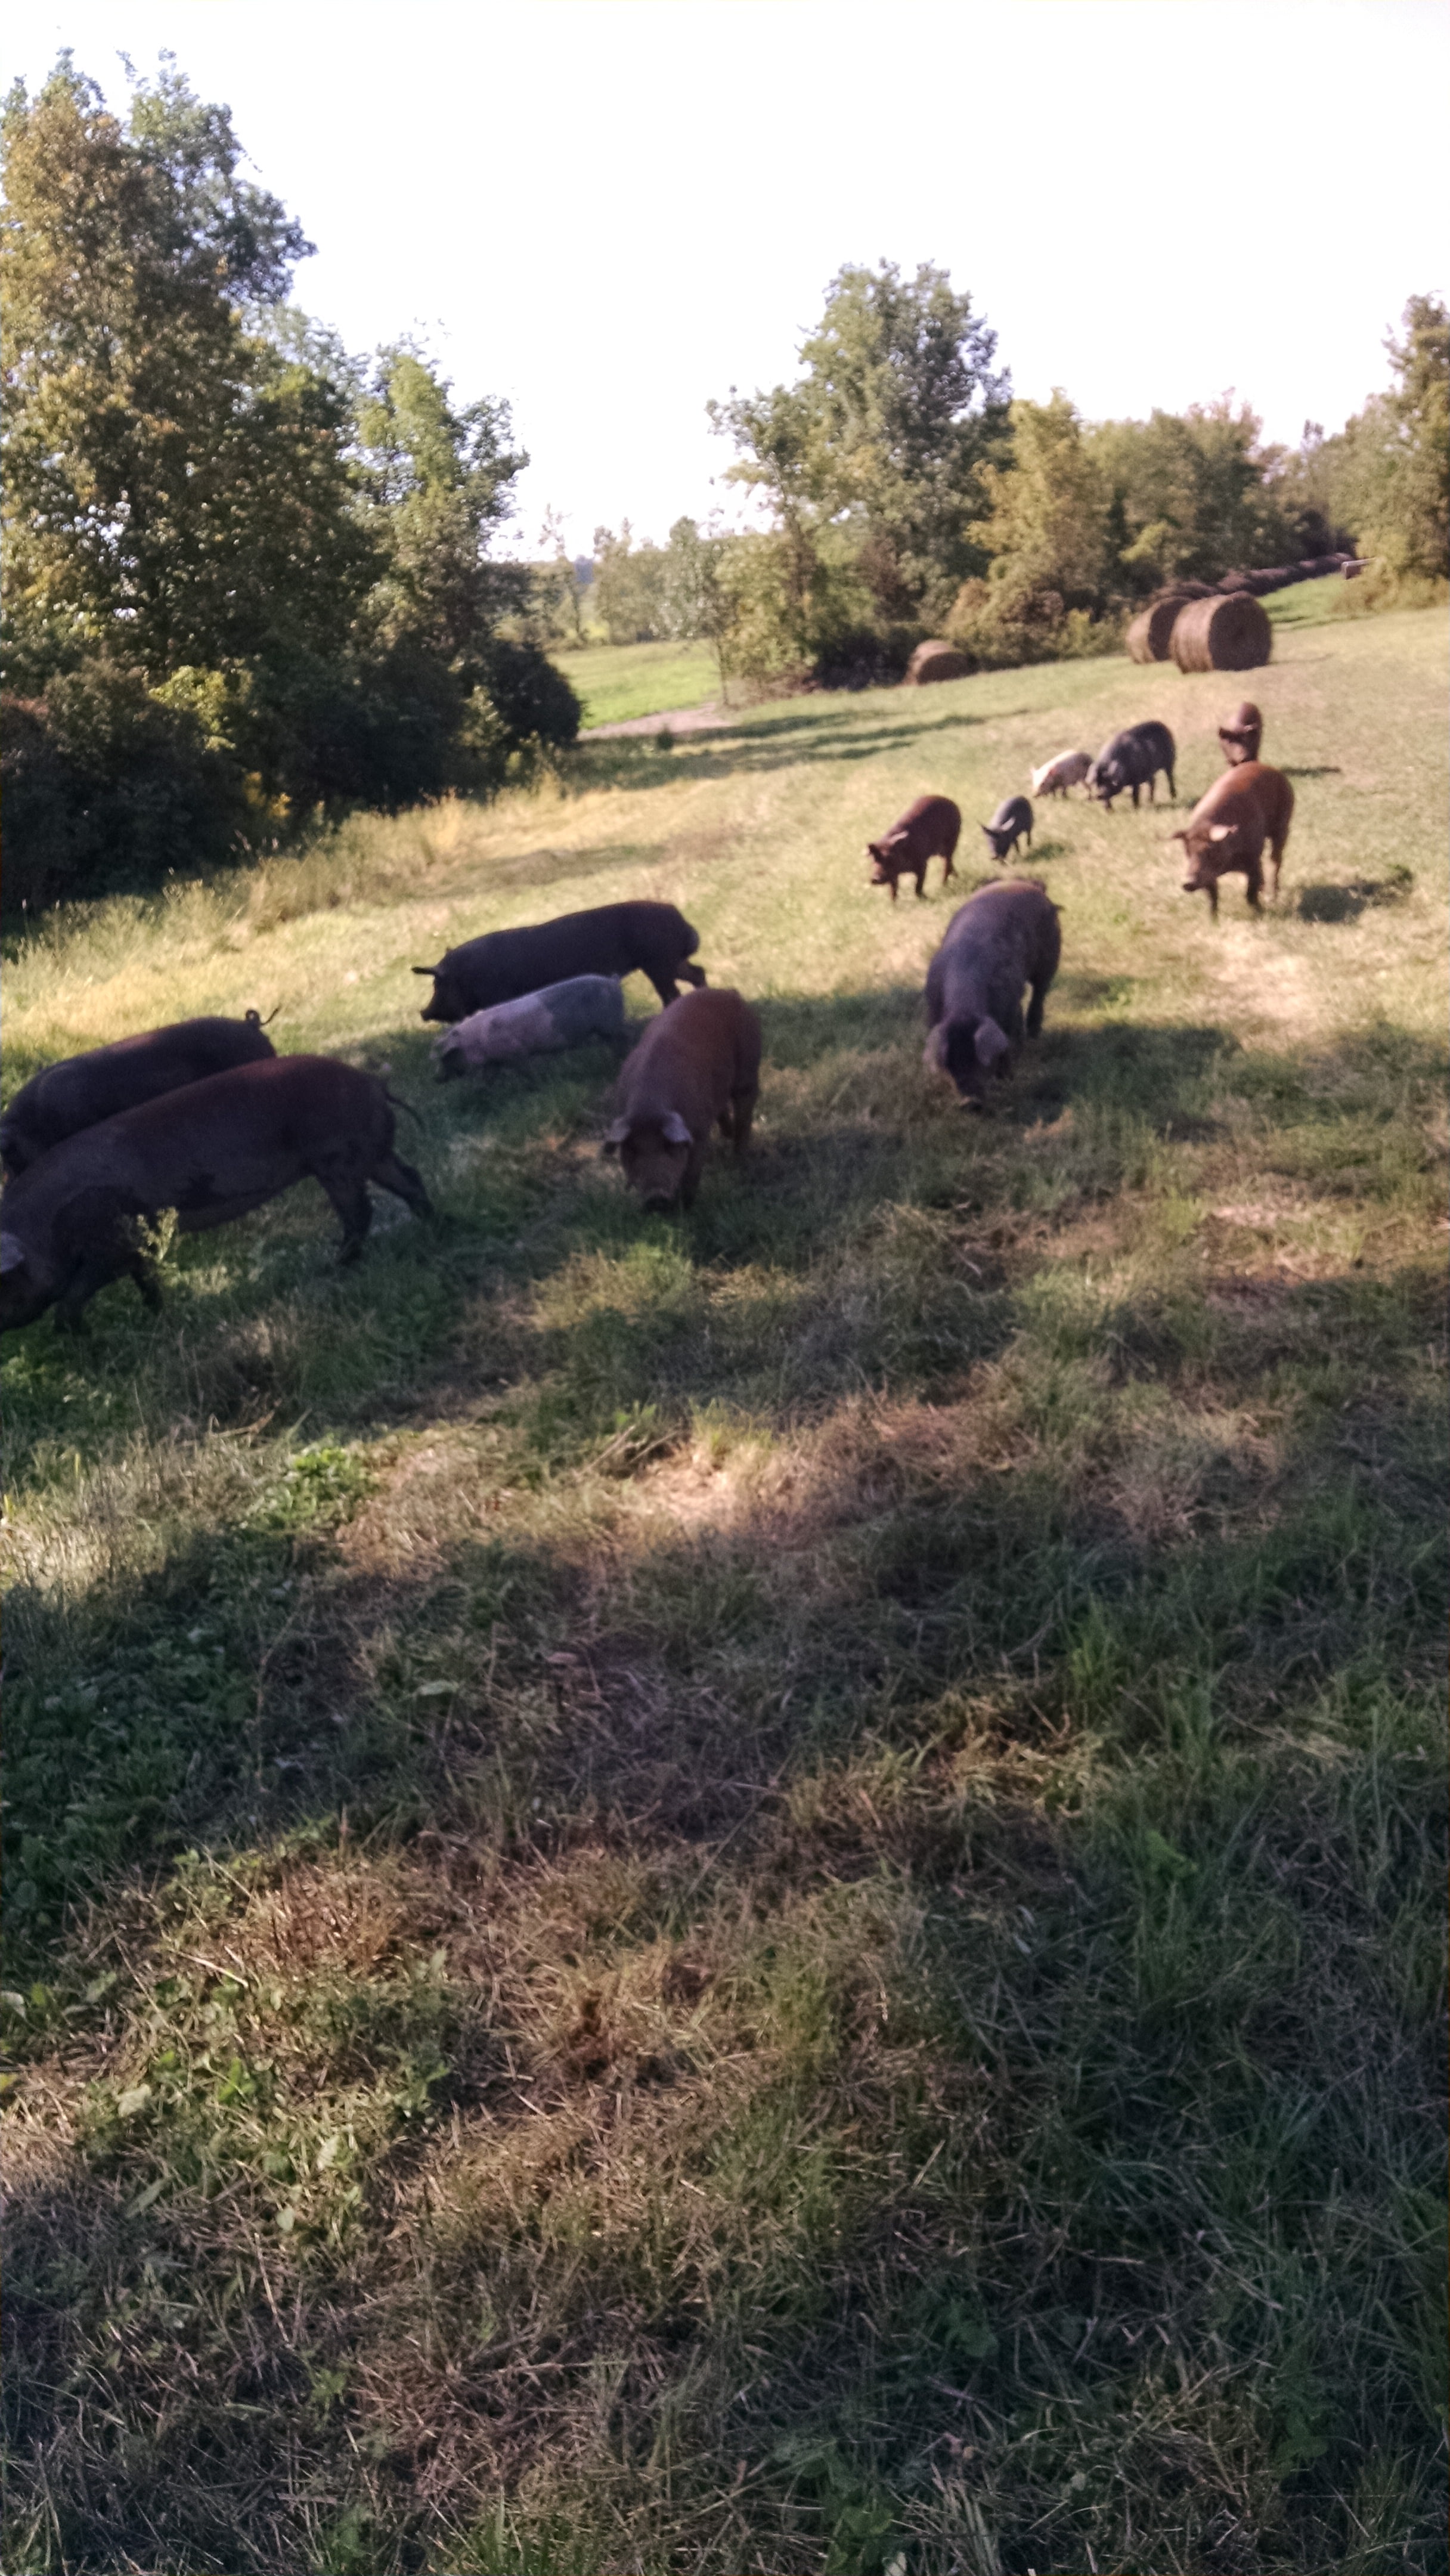 The picture is blurry, but that's because I took it while walking backwards.  The kids were with me when we encountered this group of a dozen pigs meandering through the hedgerows eating fallen apples.  We grabbed some buckets and starting rattling the buckets (the pigs assume this means we have food for them), and they followed us a quarter mile back to where they were supposed to be.